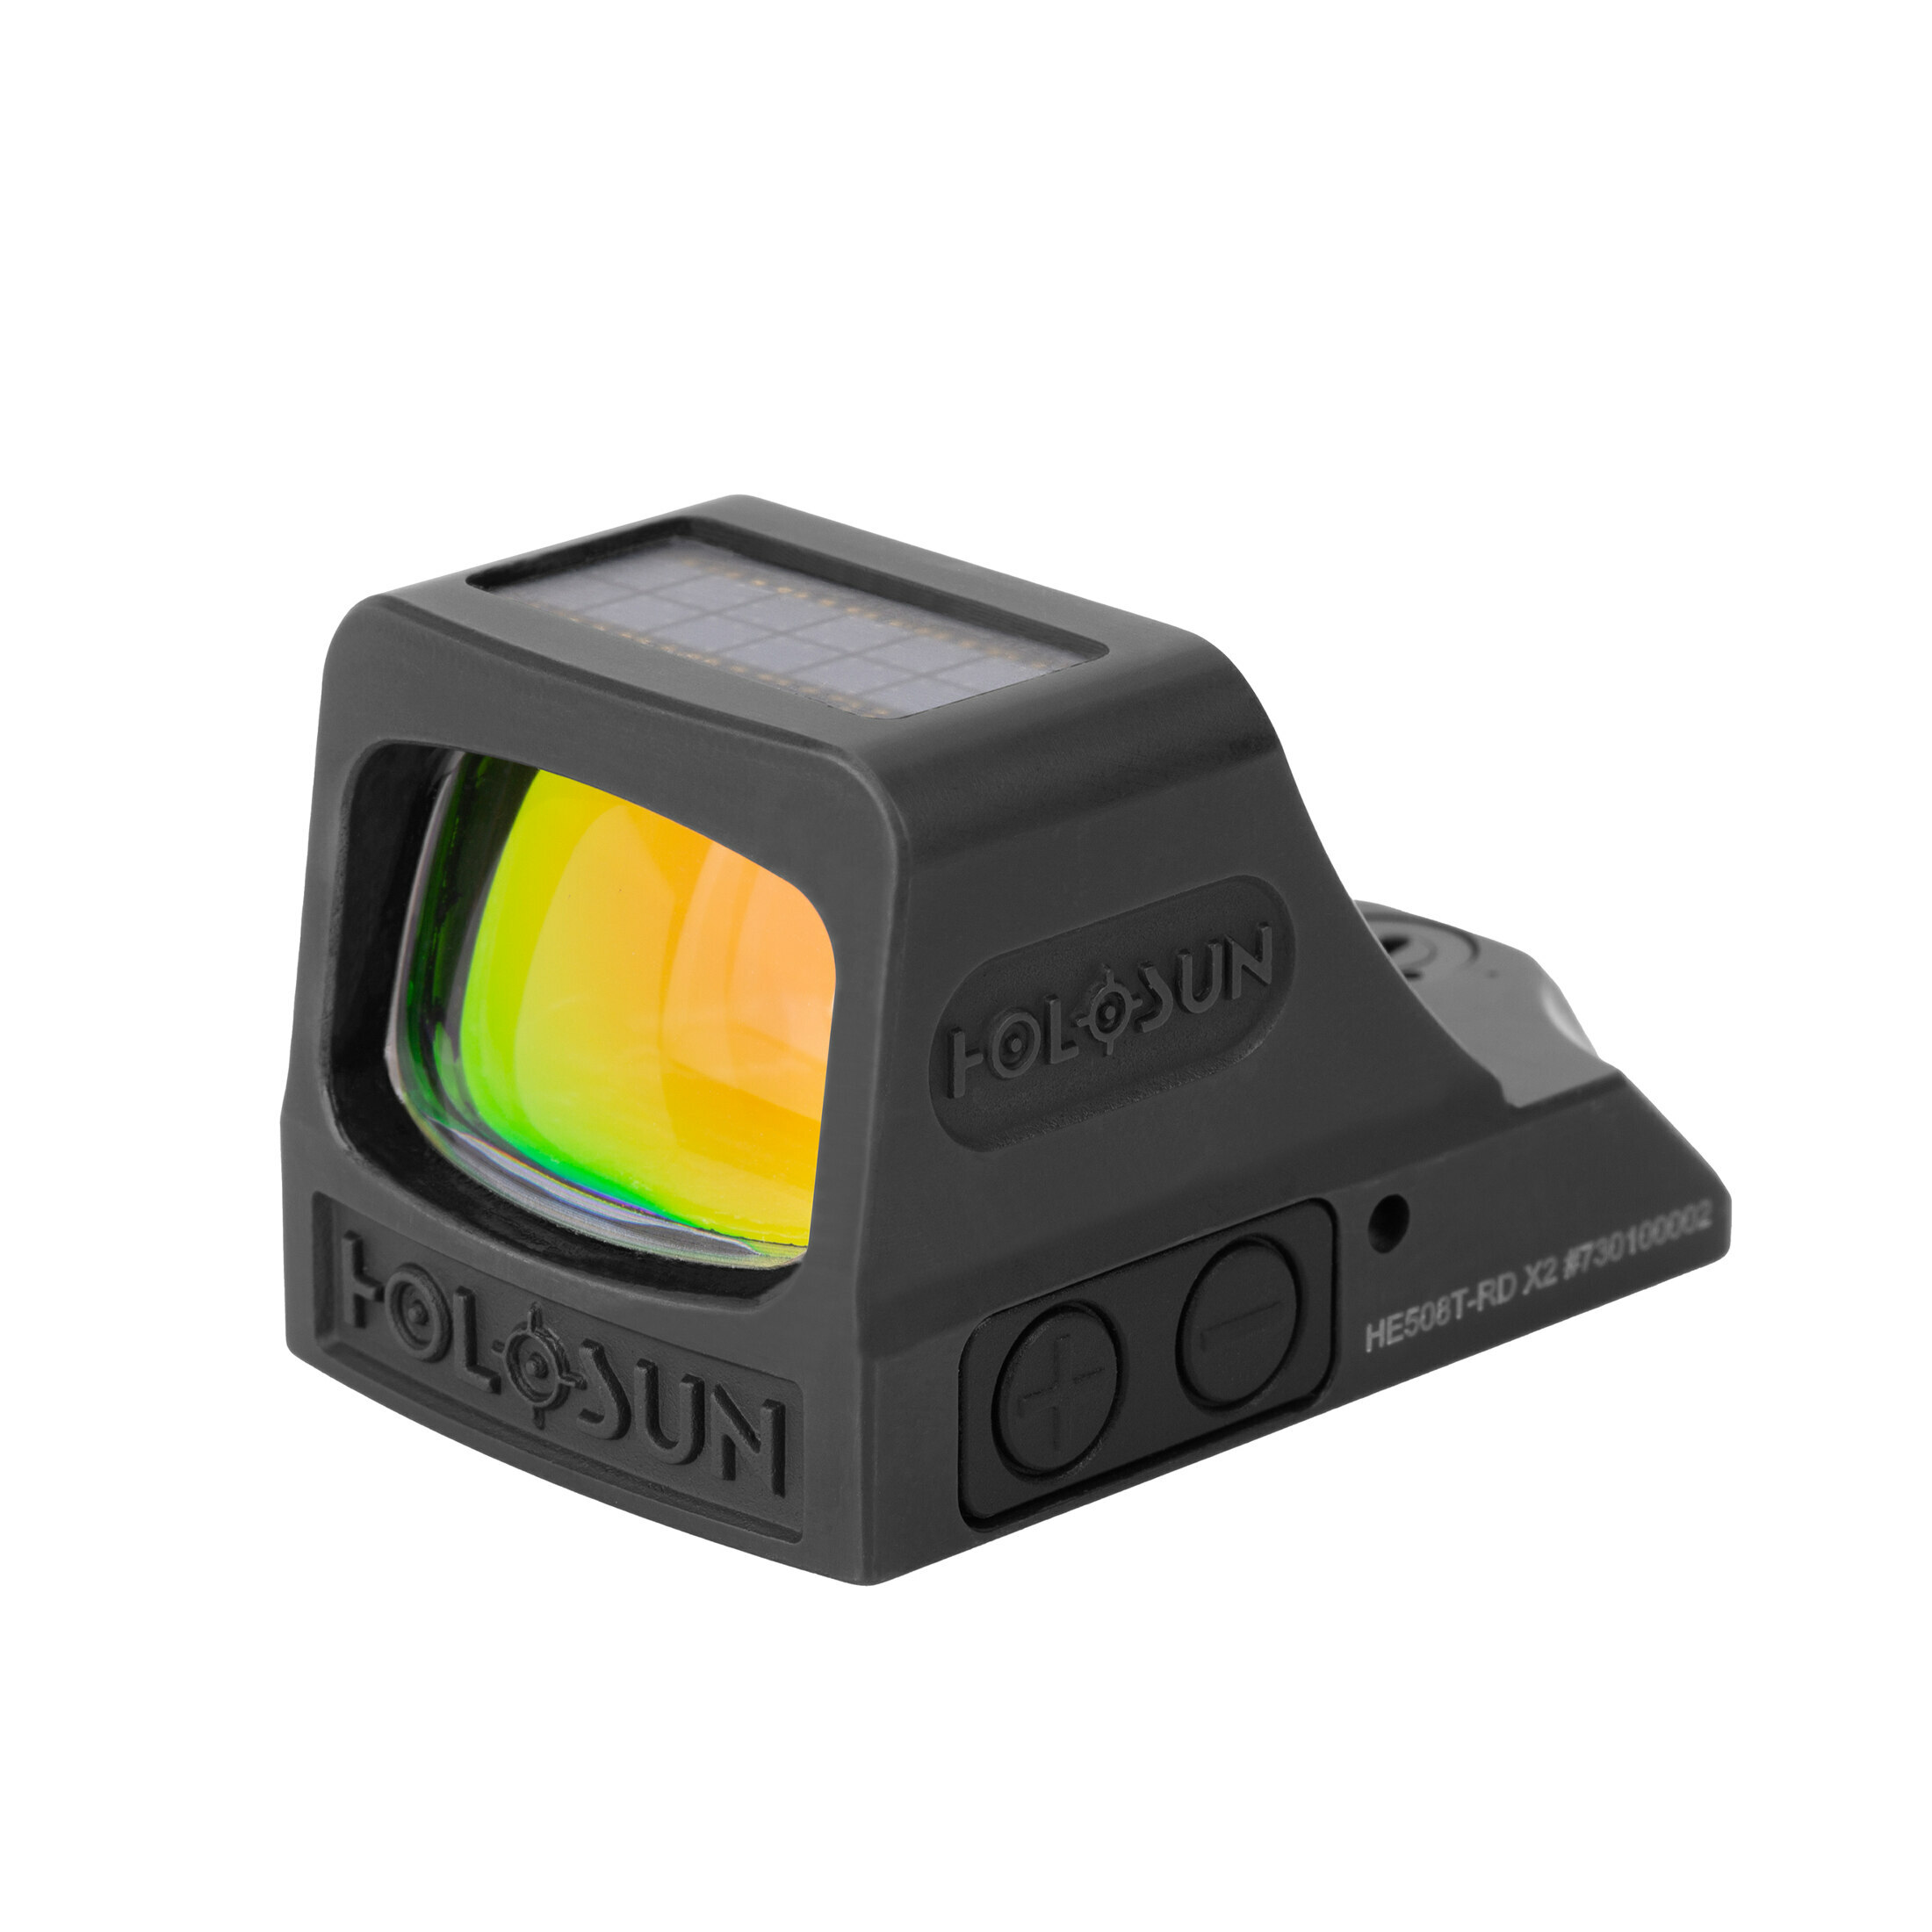 Holosun Open Reflex Red Dot Sight HE508T-RD-X2 with switchable reticle, innovative lock mode and ti…